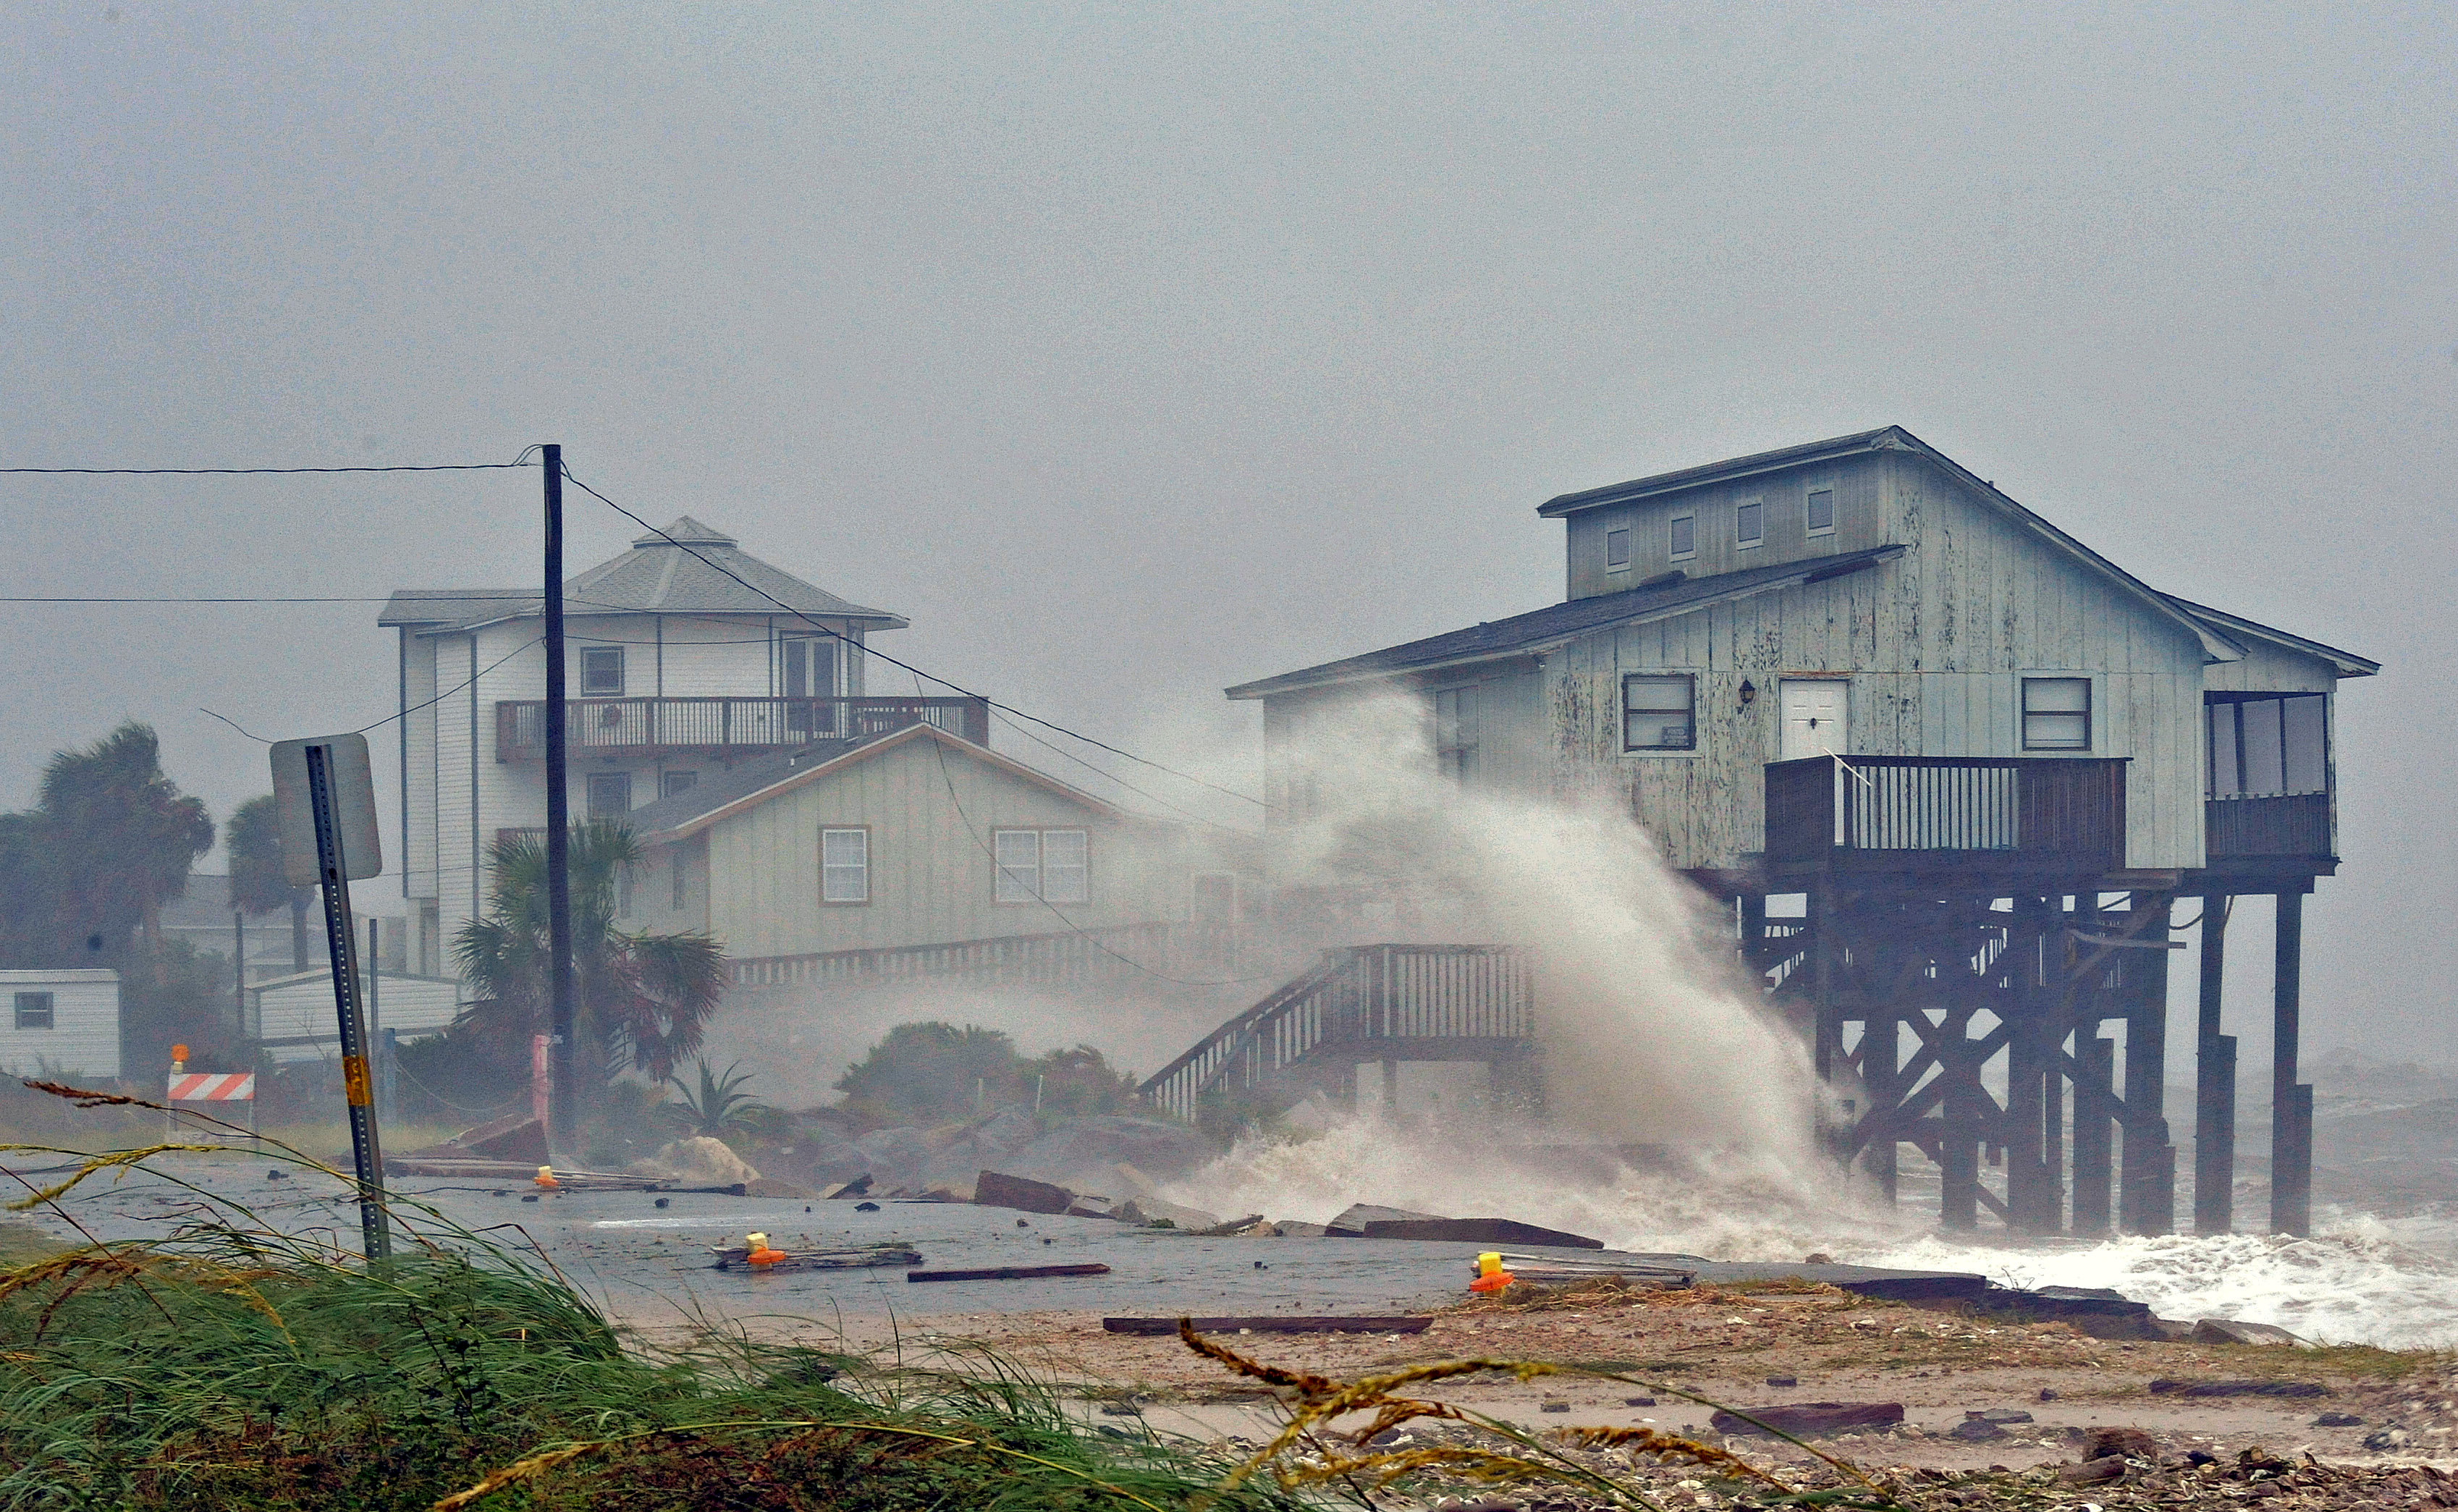 Waves crash on stilt houses along the shore due to Hurricane Michael at Alligator Point in Franklin County